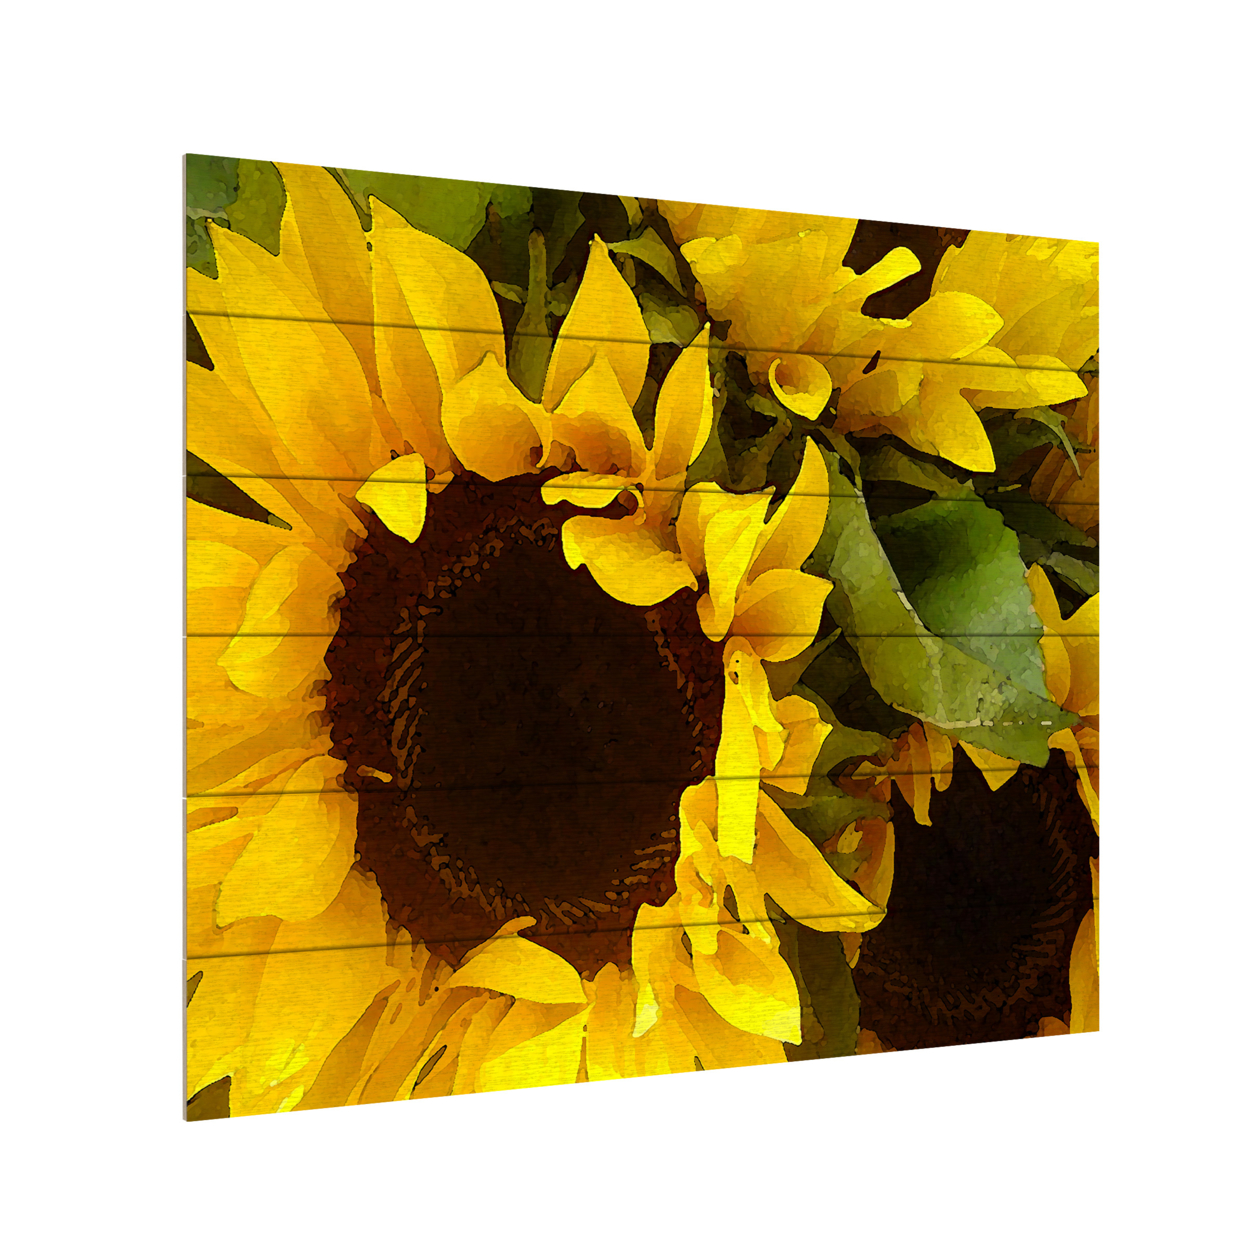 Wooden Slat Art 18 X 22 Inches Titled Sunflowers Ready To Hang Home Decor Picture